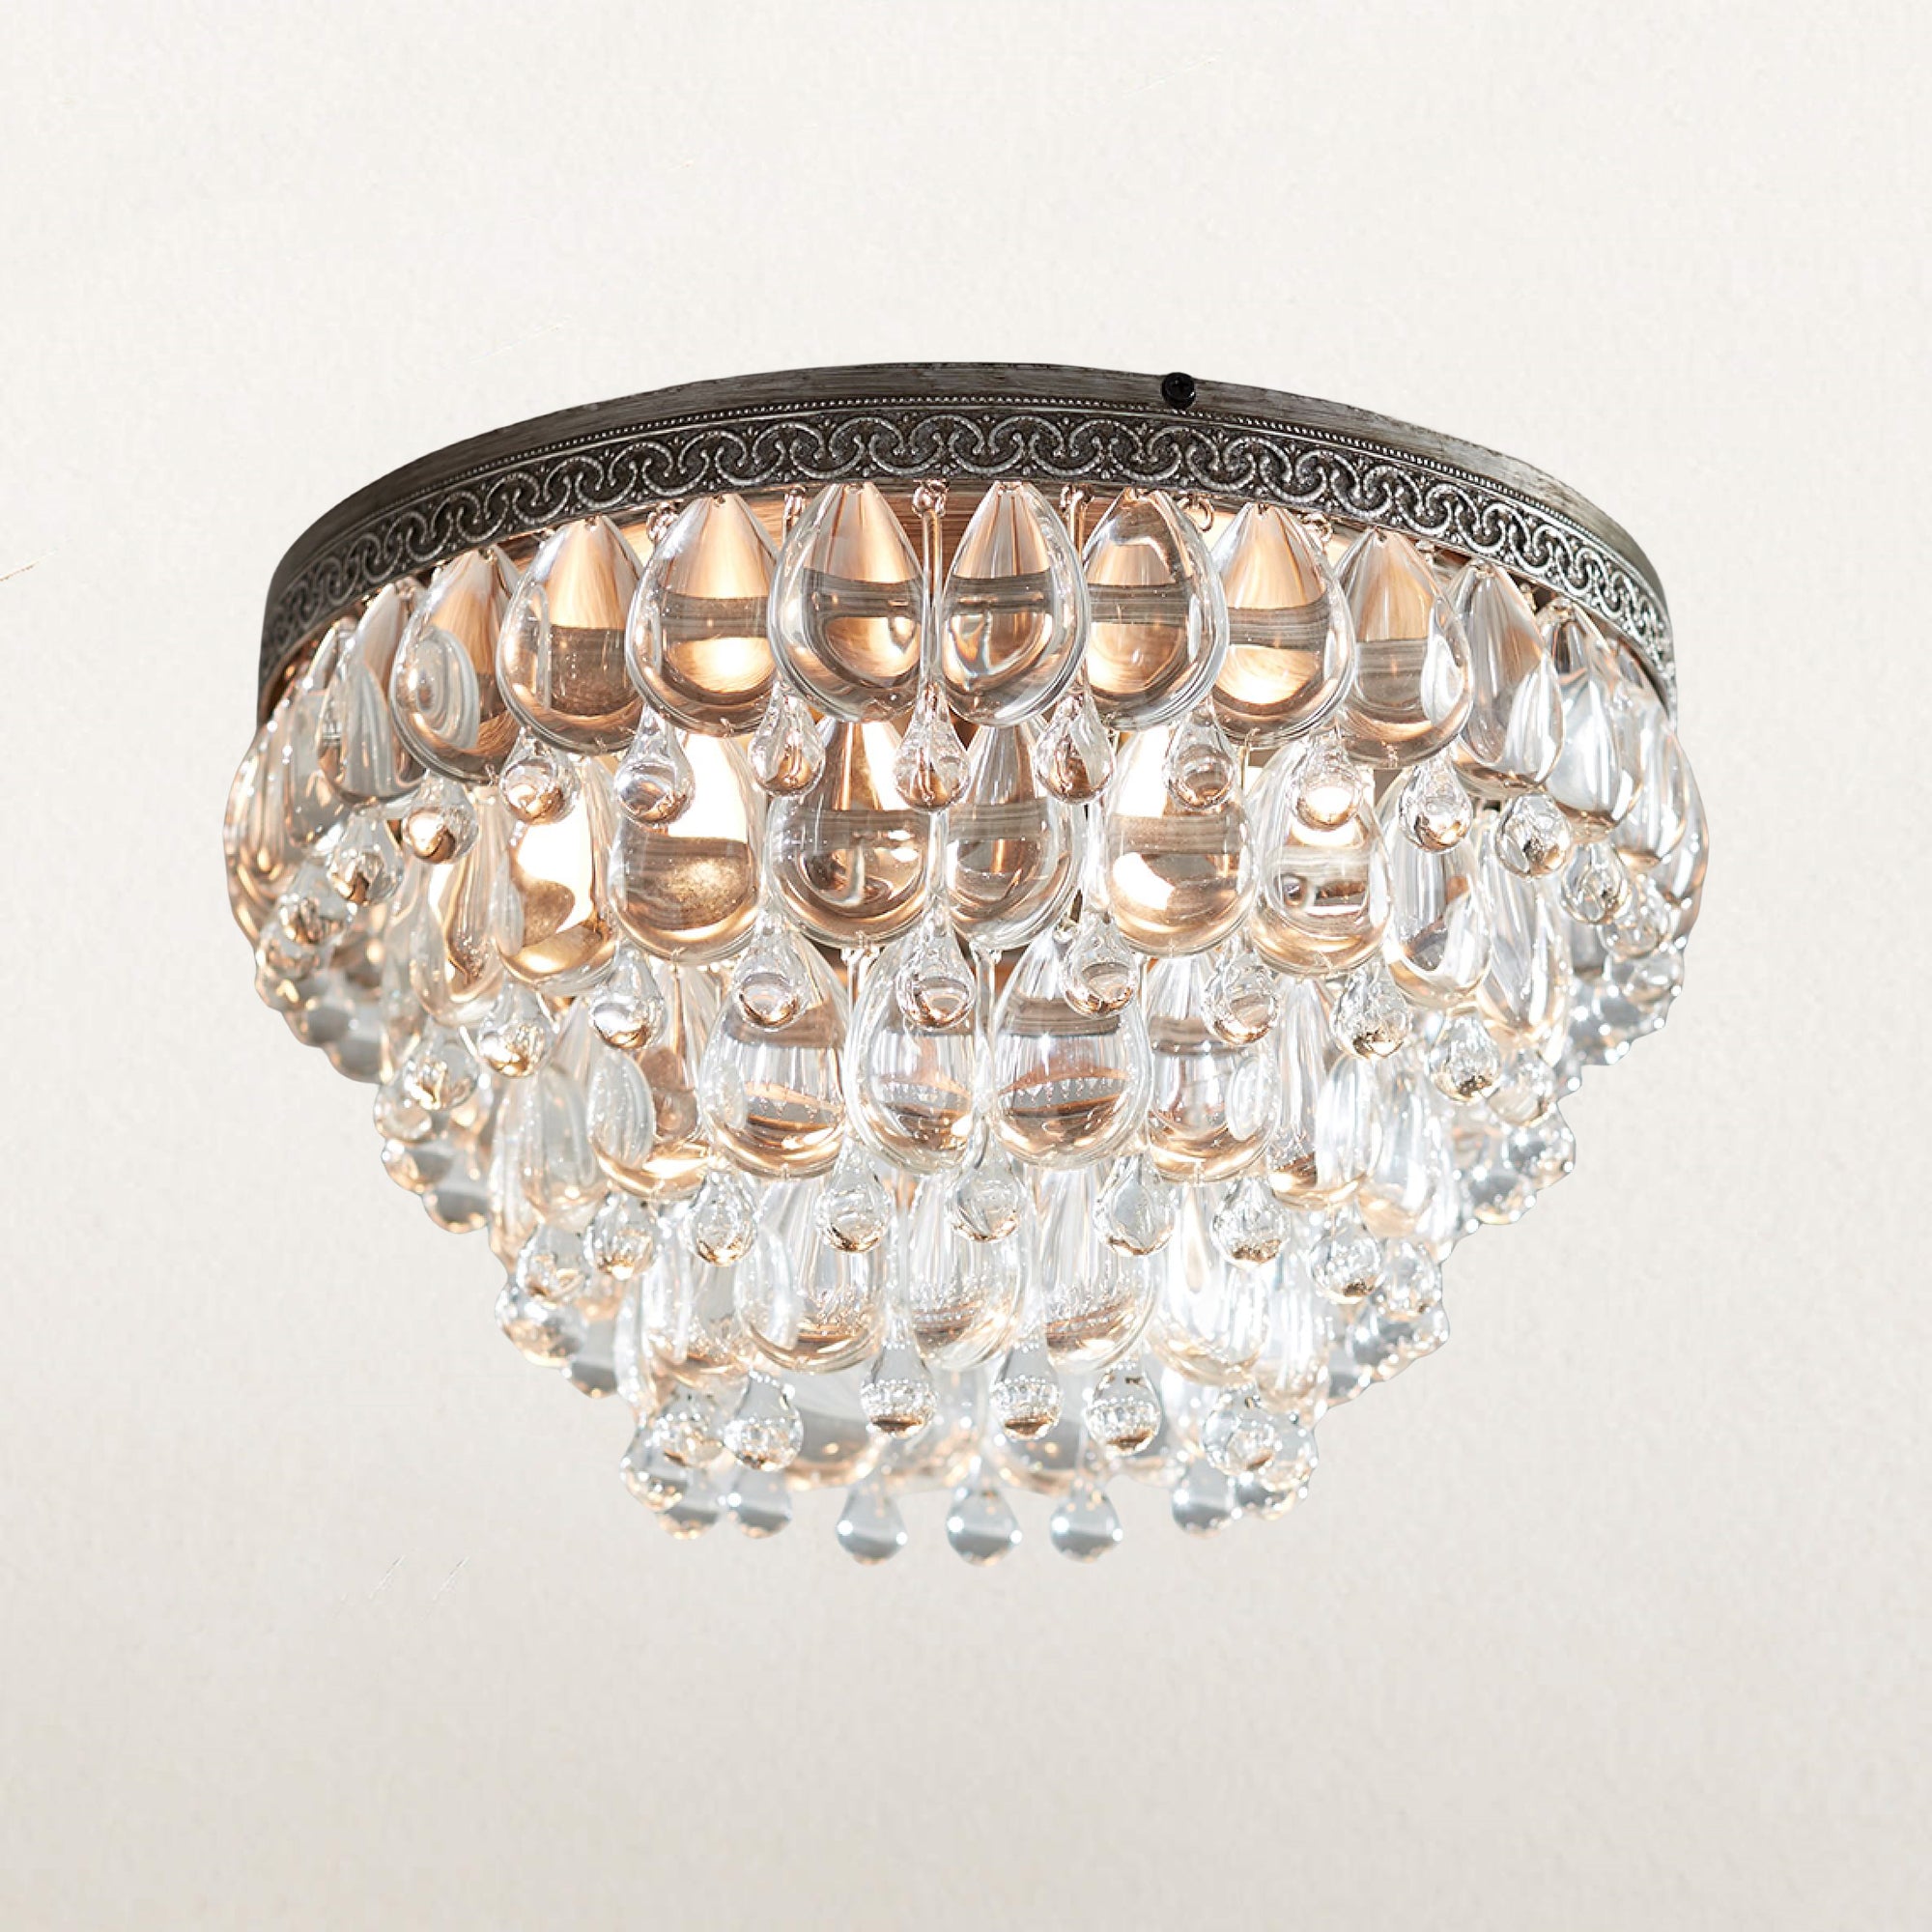 Raindrop Elegance Crystal Flush Mount - Faceted-Glass Crystals and Rain Drop Display for Bedroom and Living Room Lighting